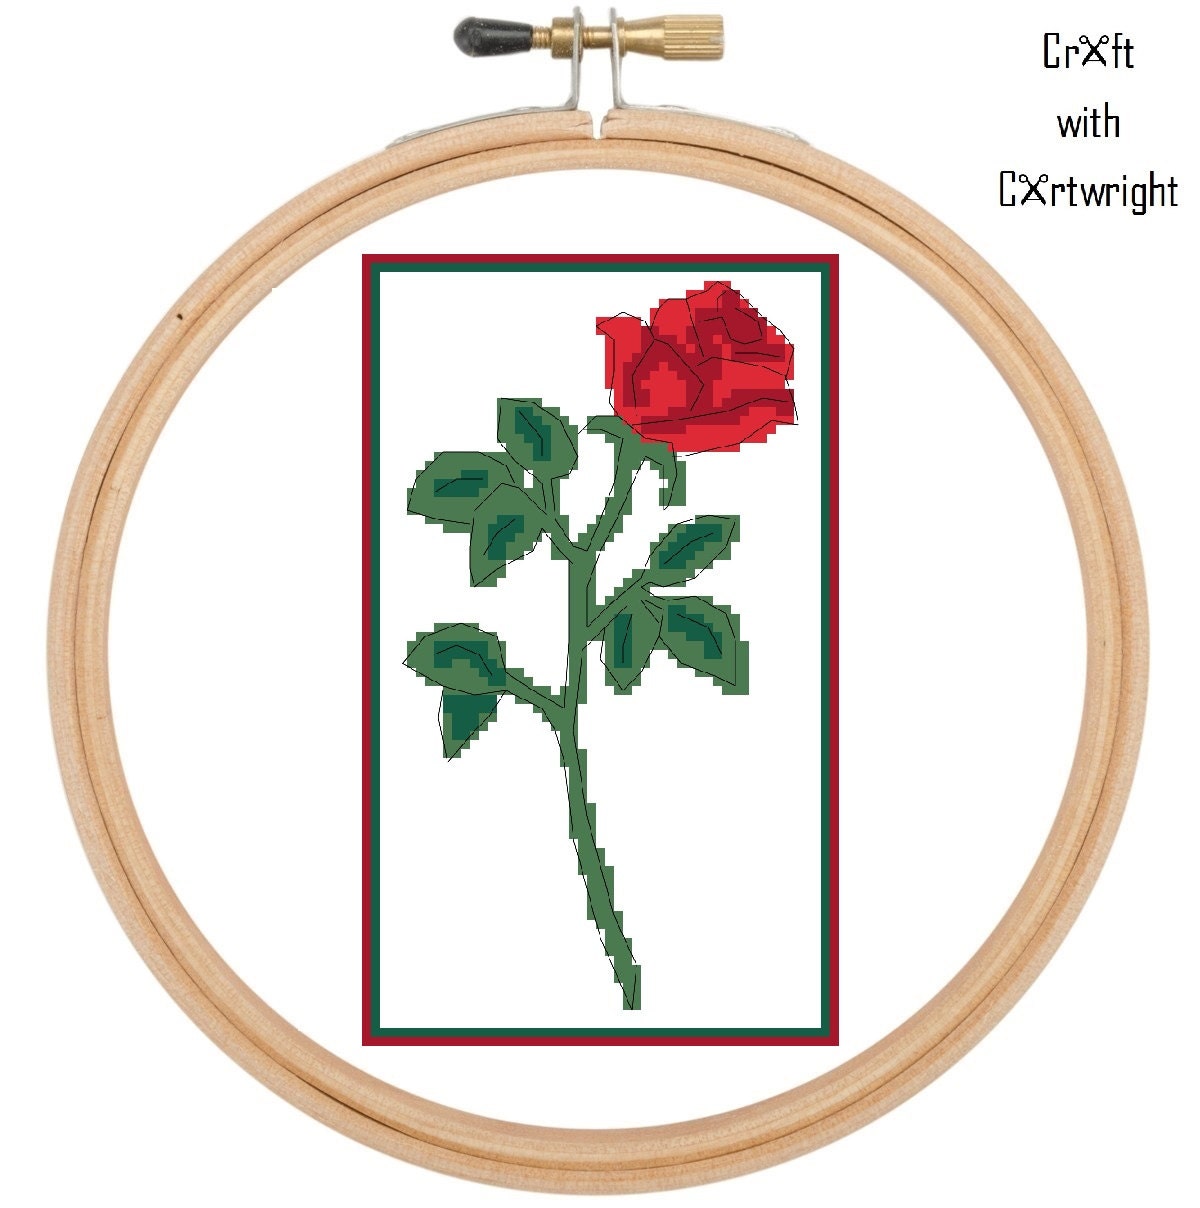 Cross stitch pattern single red rose by CraftwithCartwright